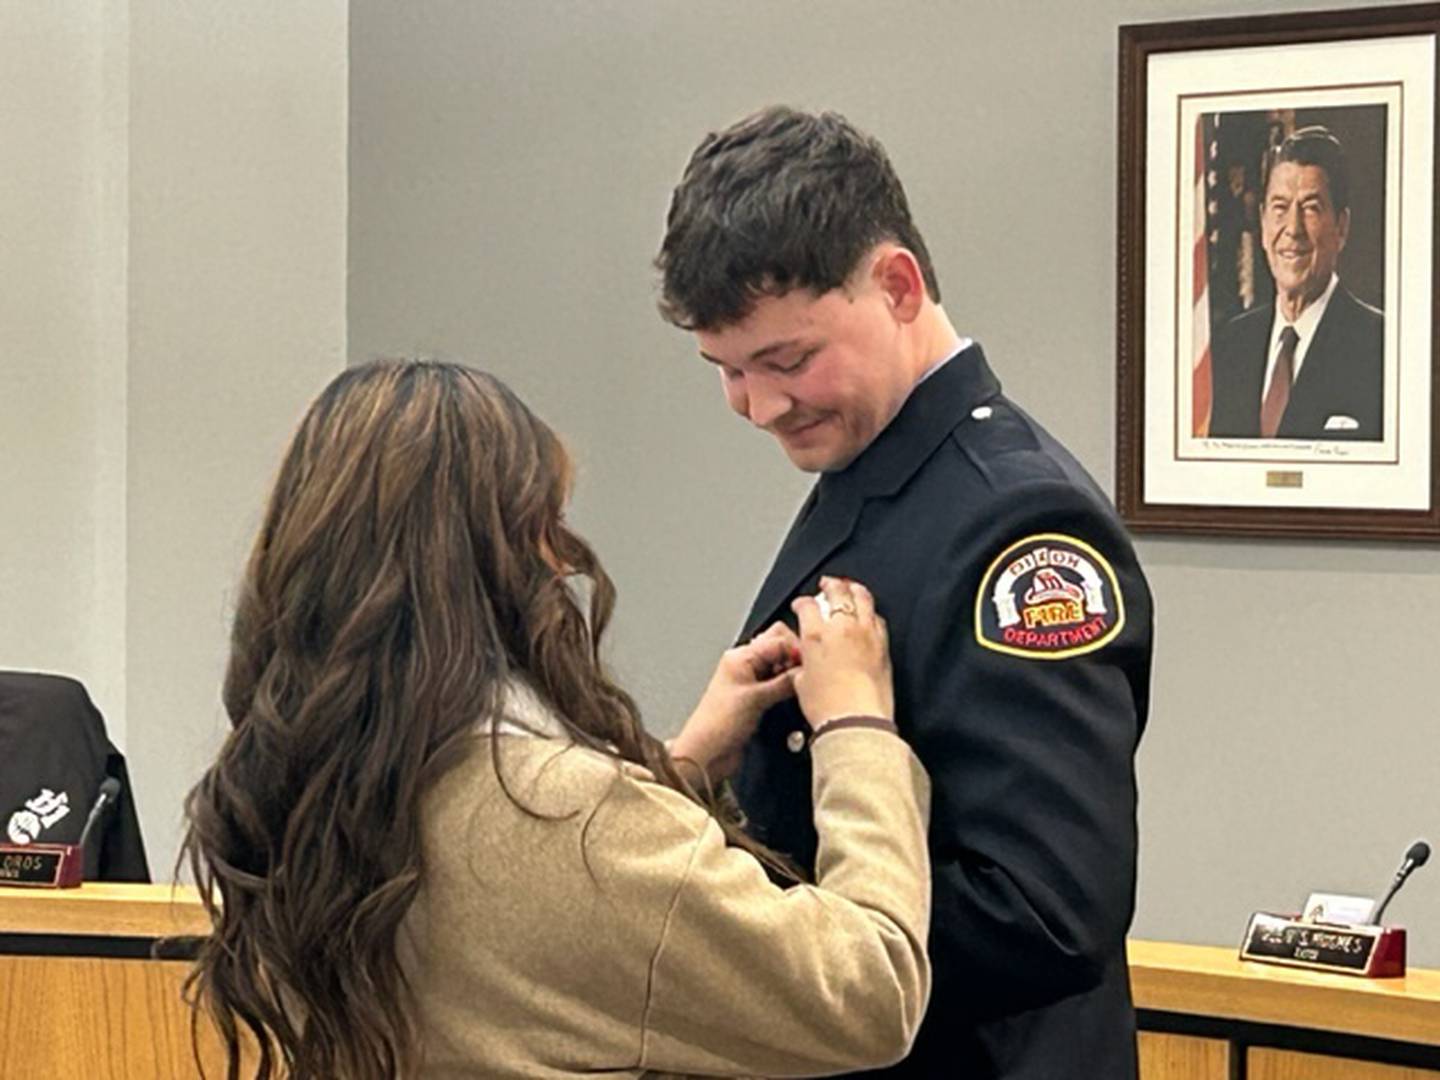 Evan Munson smiles as his firefighter badge is pinned on his jacket Monday at Dixon City Hall.